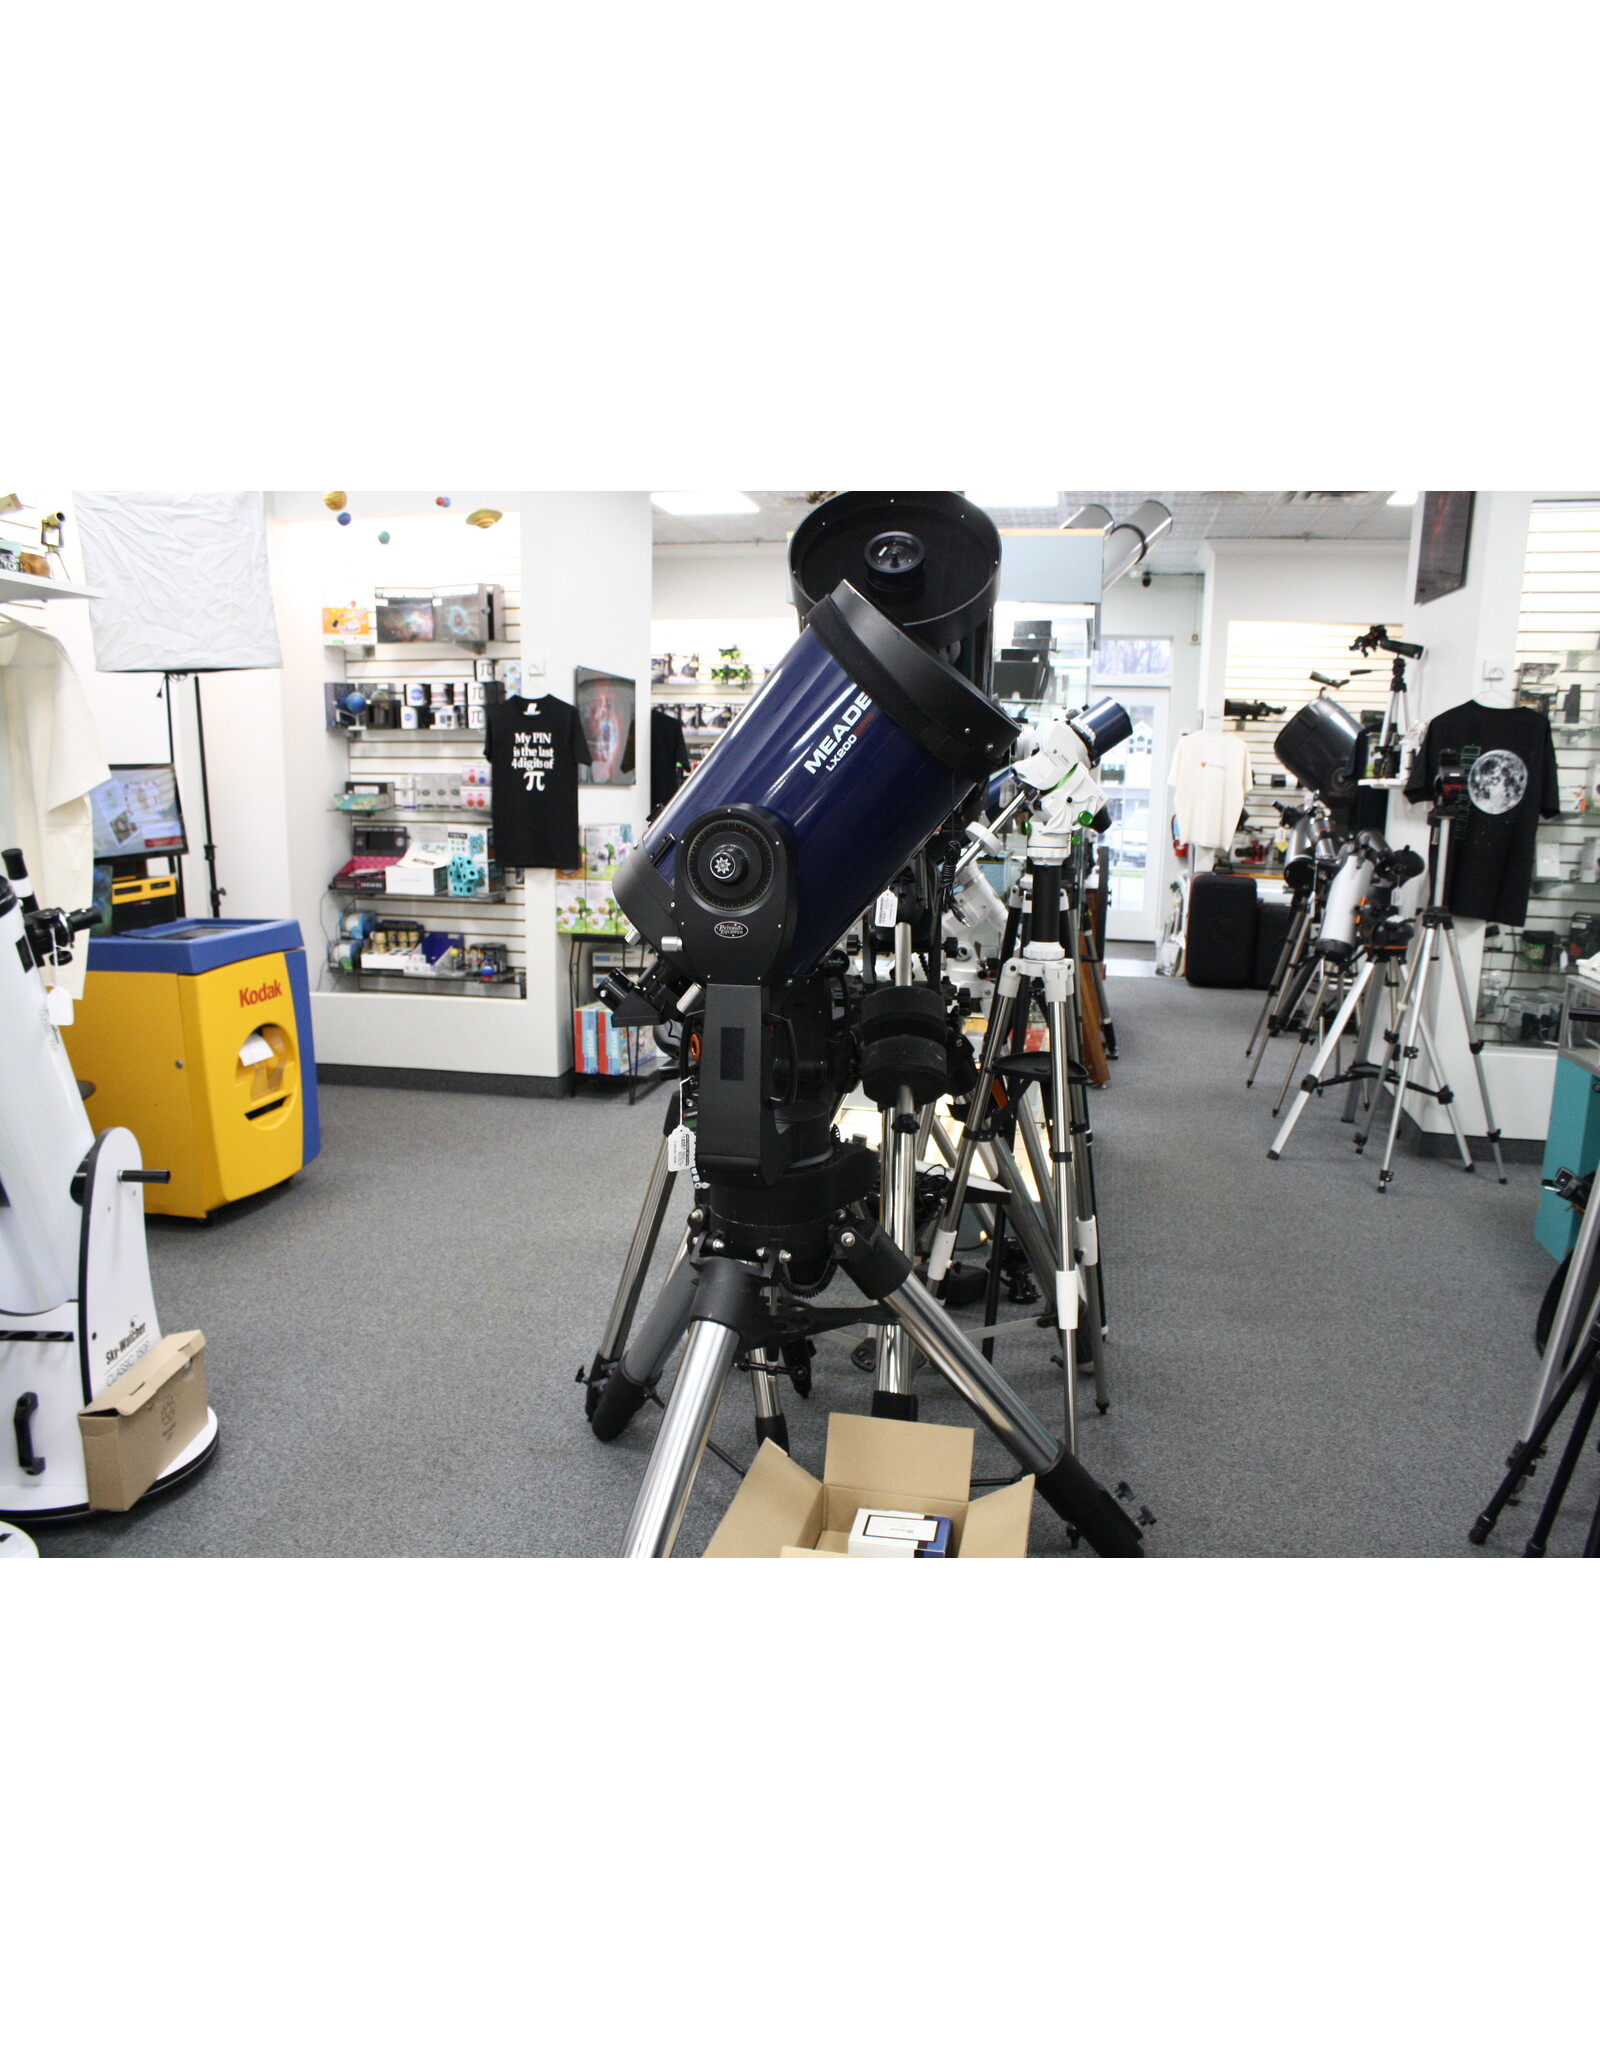 Meade Meade 12" LX200GPS with Giant Field Tripod, RS232 Cable, AC Adapter, DC Power Cord, Microfocuser, 2 Inch Diagonal, And Full Petersen UPGRADES!